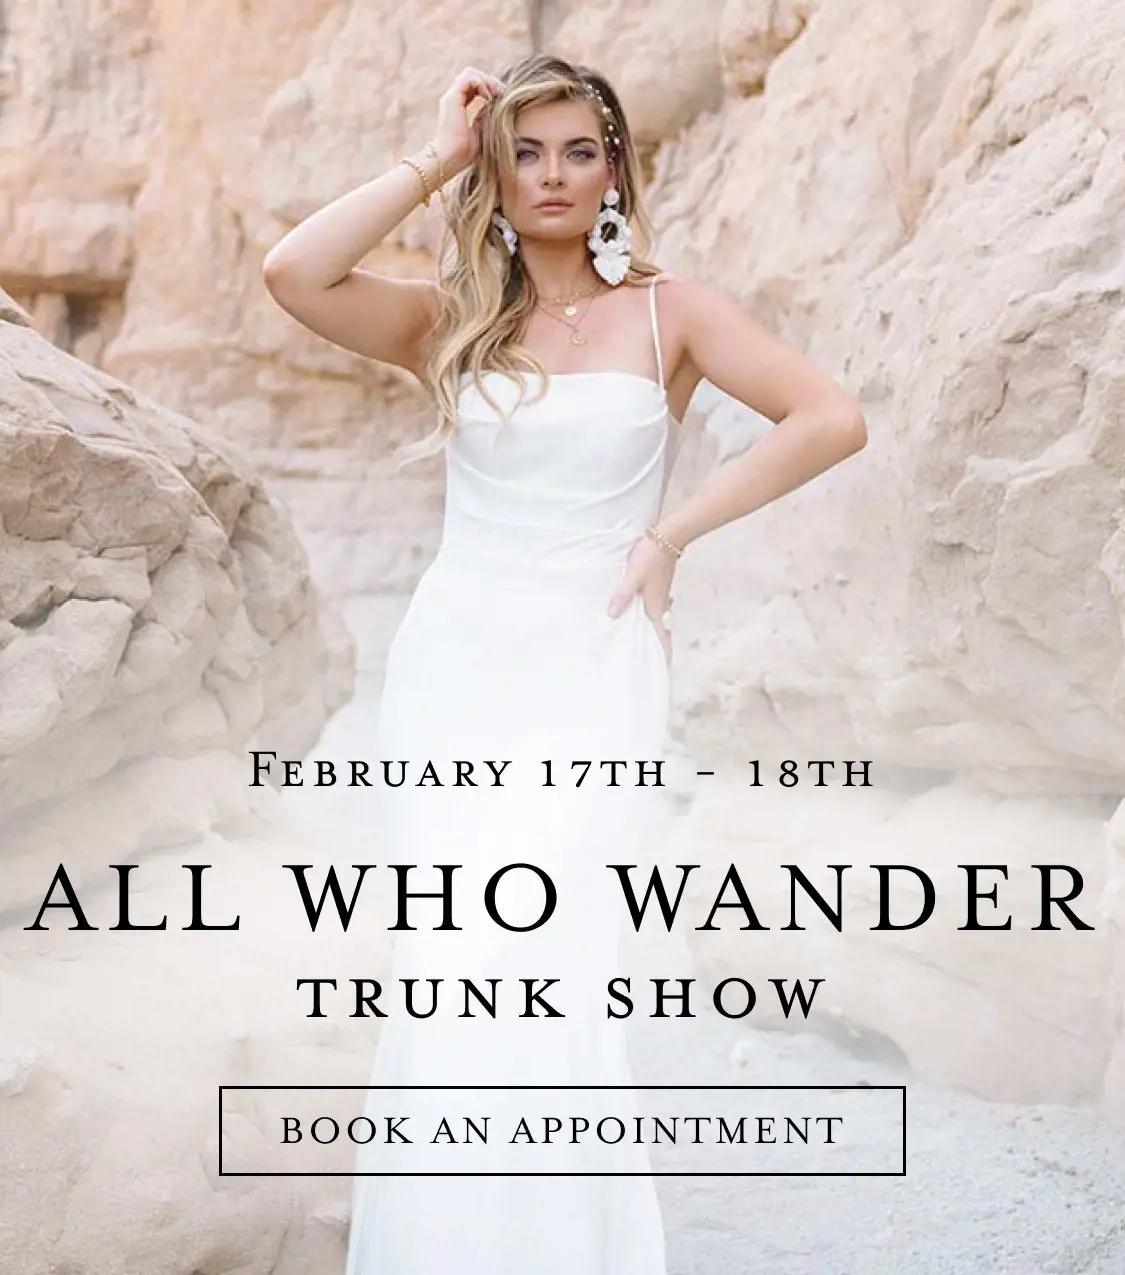 All Who Wander trunk show at Bella Bridal Gallery